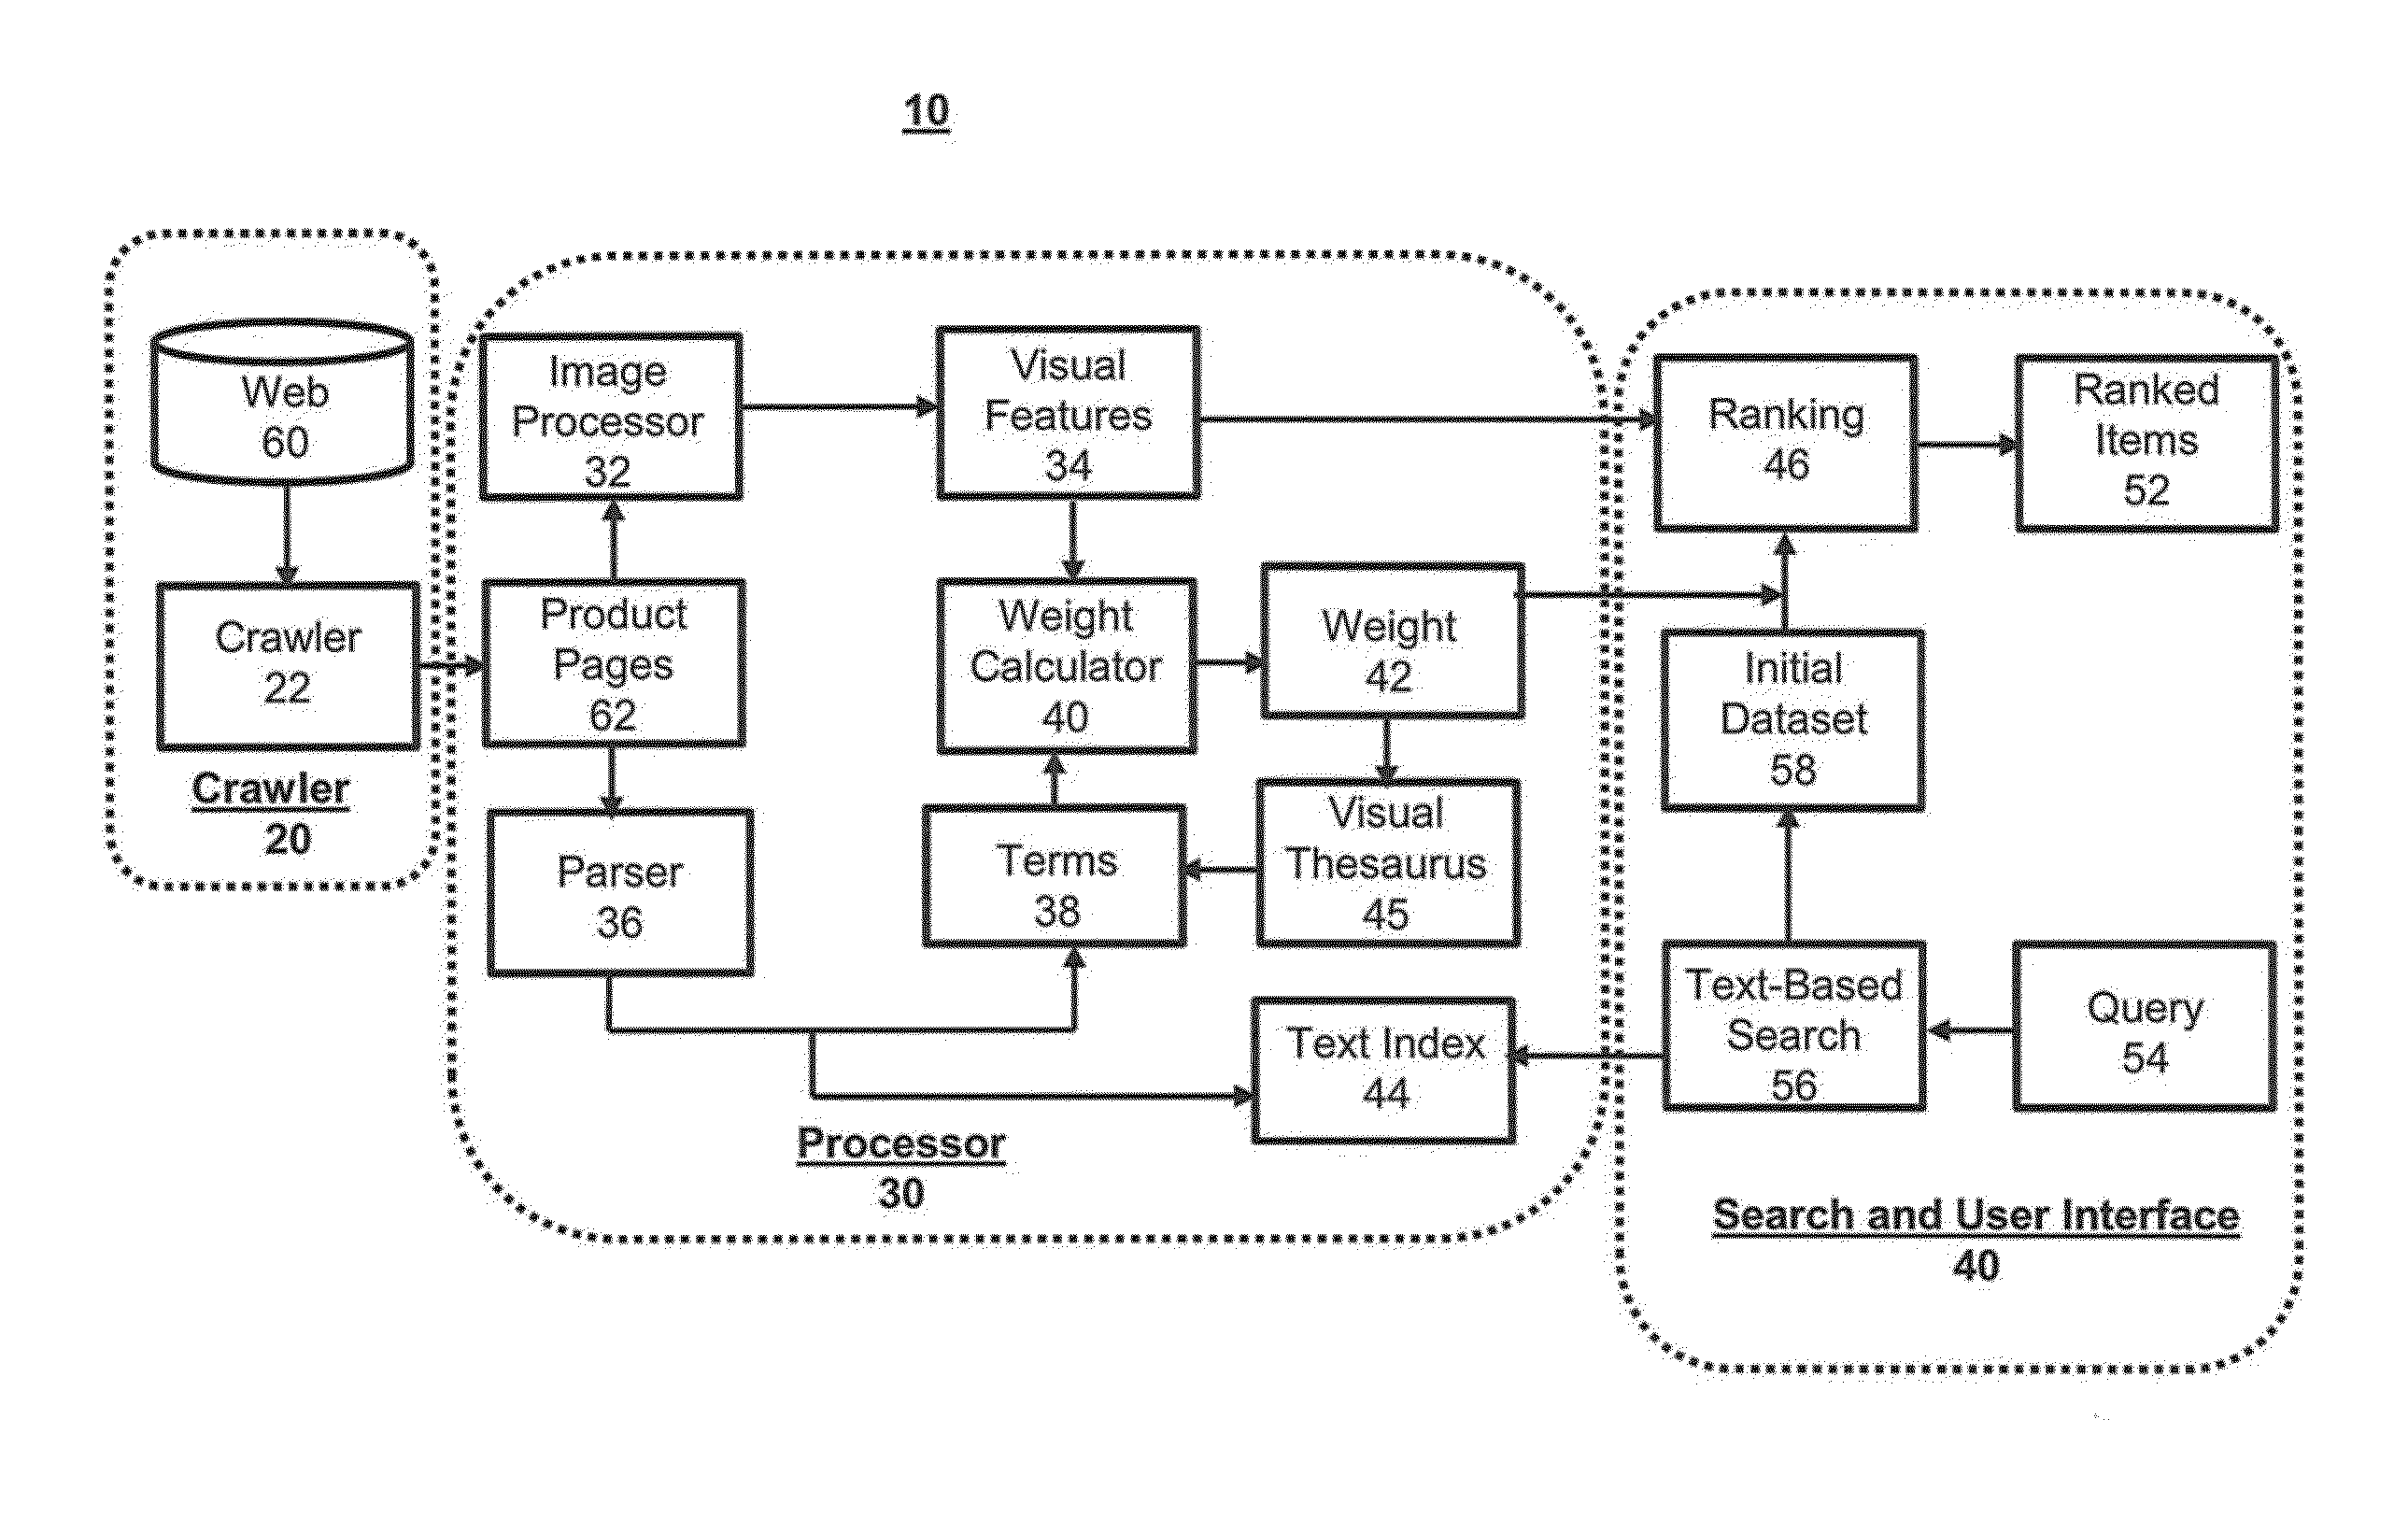 System and methods of integrating visual features and textual features for image searching